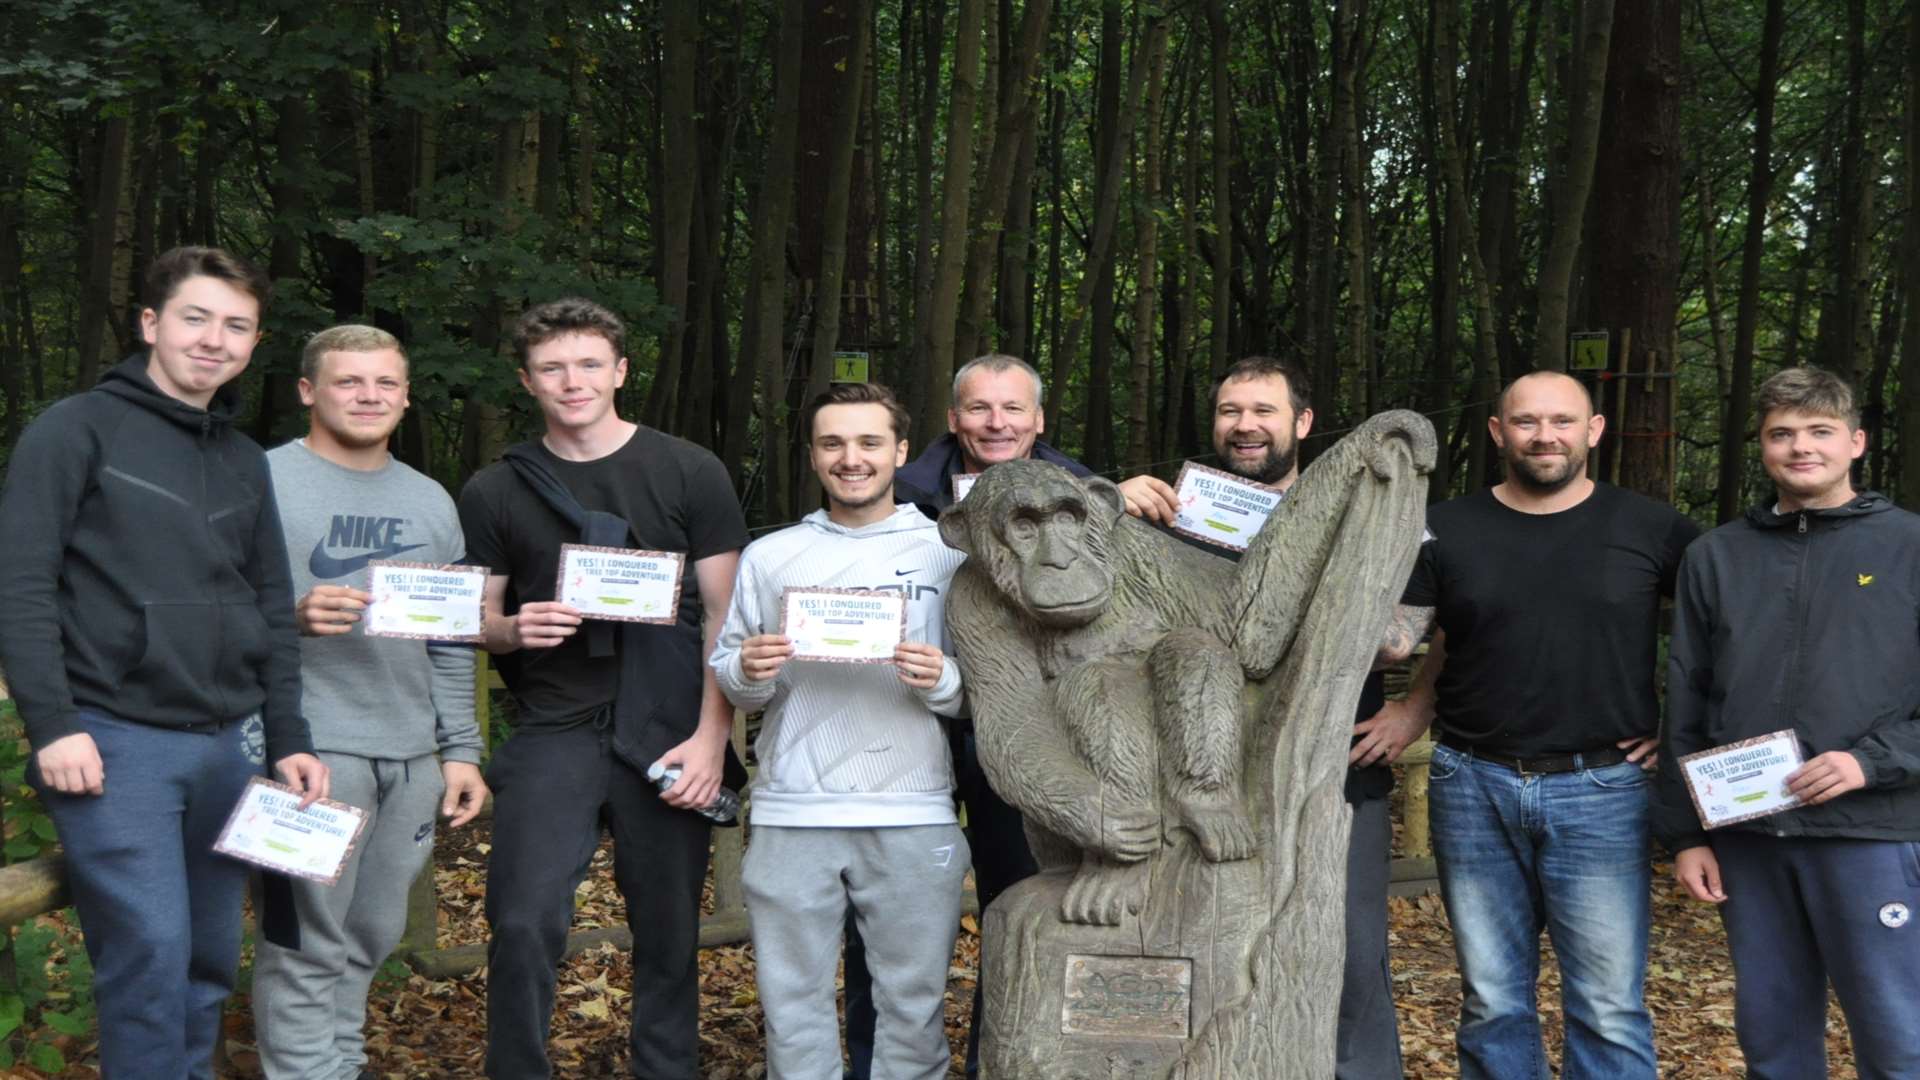 On a teambuilding day at GoApe, from left, Walker Construction apprentices Finley Beadle, Matt Ryan, Luke Chapman, Tom Waklin, southern construction director Martin Watts, site manager Alex Goble, project manager Stuart Caldwell and apprentice Alex Cooke